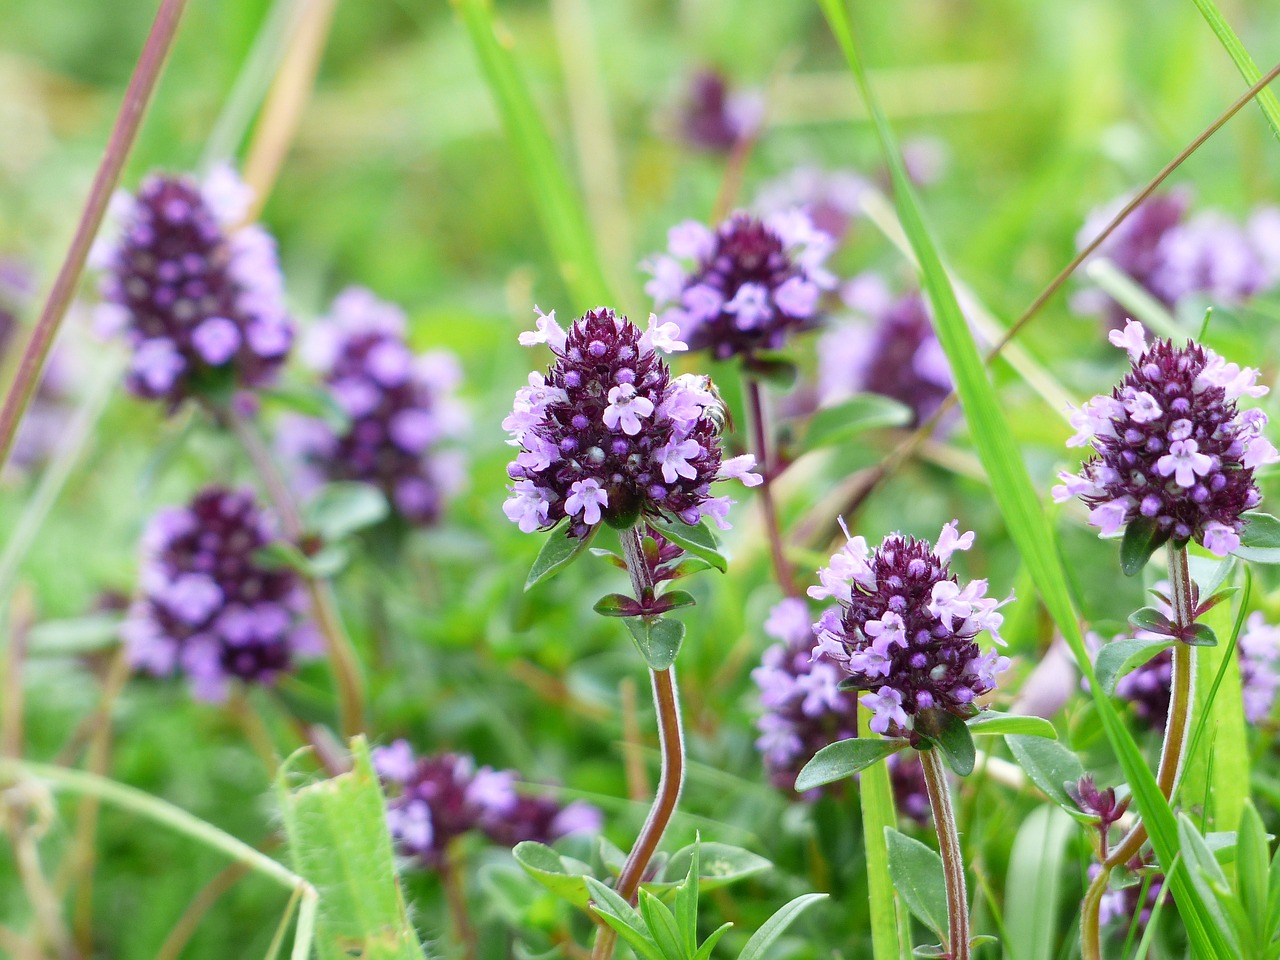 FIND OUT MORE ABOUT MARJORAM